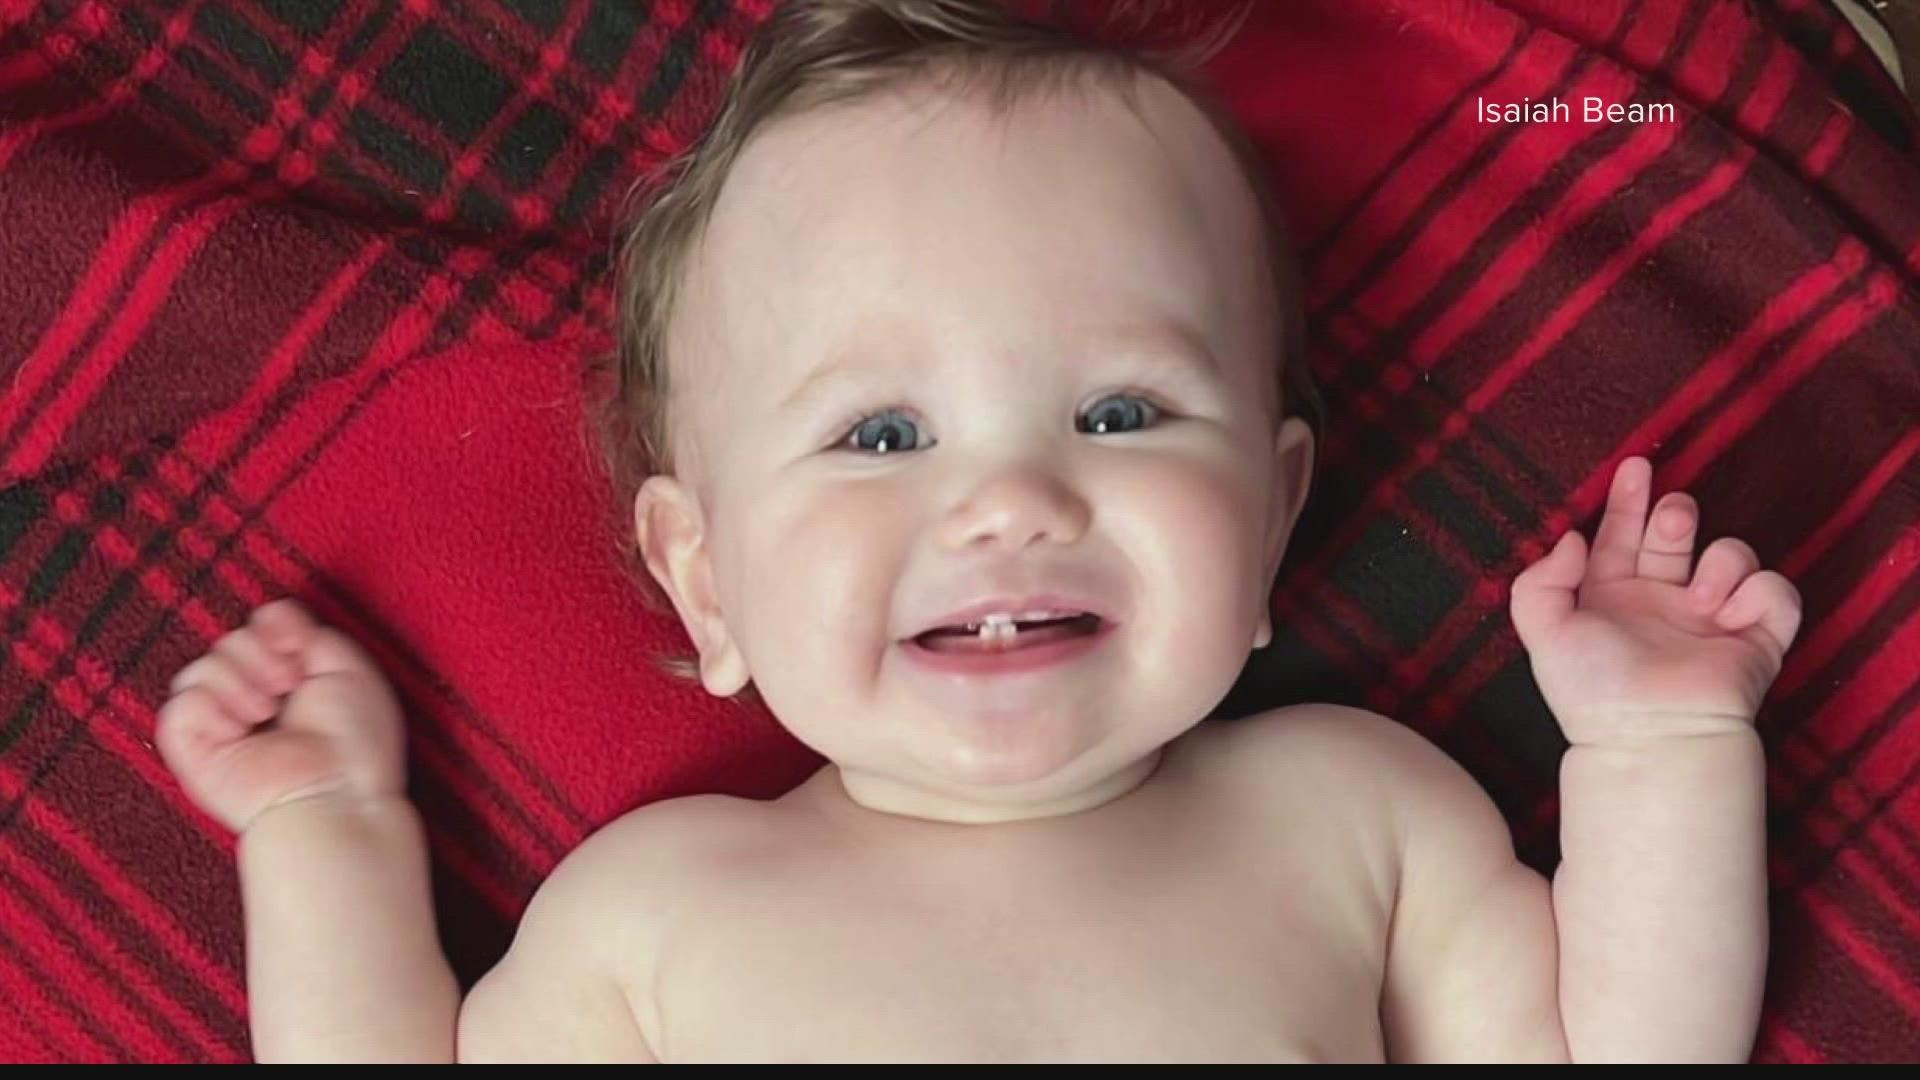 A 1-year-old is in critical condition after he was found unresponsive in a bathtub at his babysitter's home. Records show this isn't her first run-in with the law.